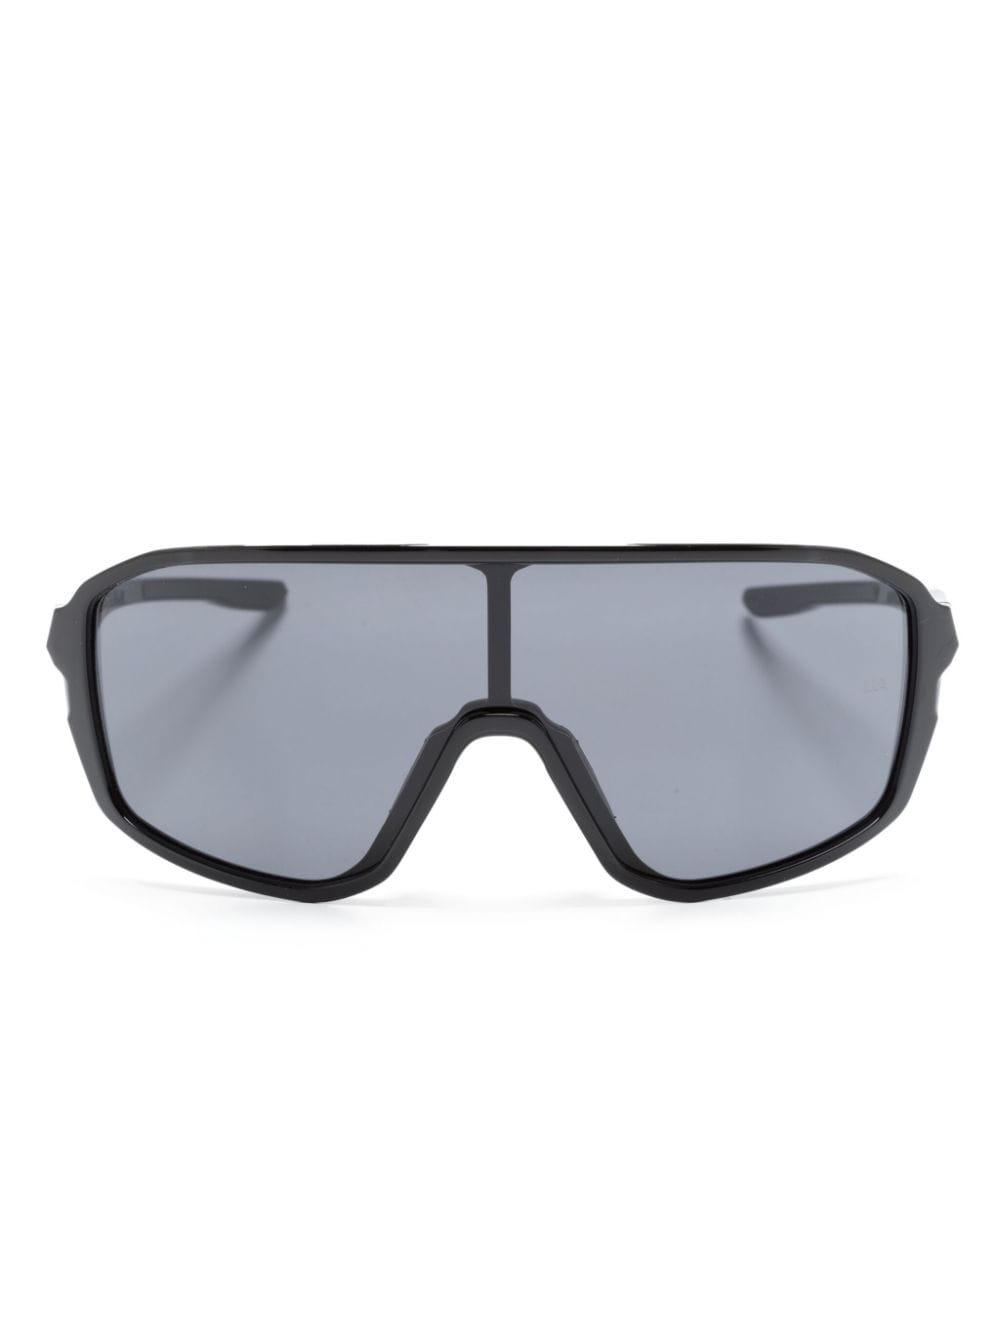 Under Armour Gameday/g Oversize Sunglasses In Black